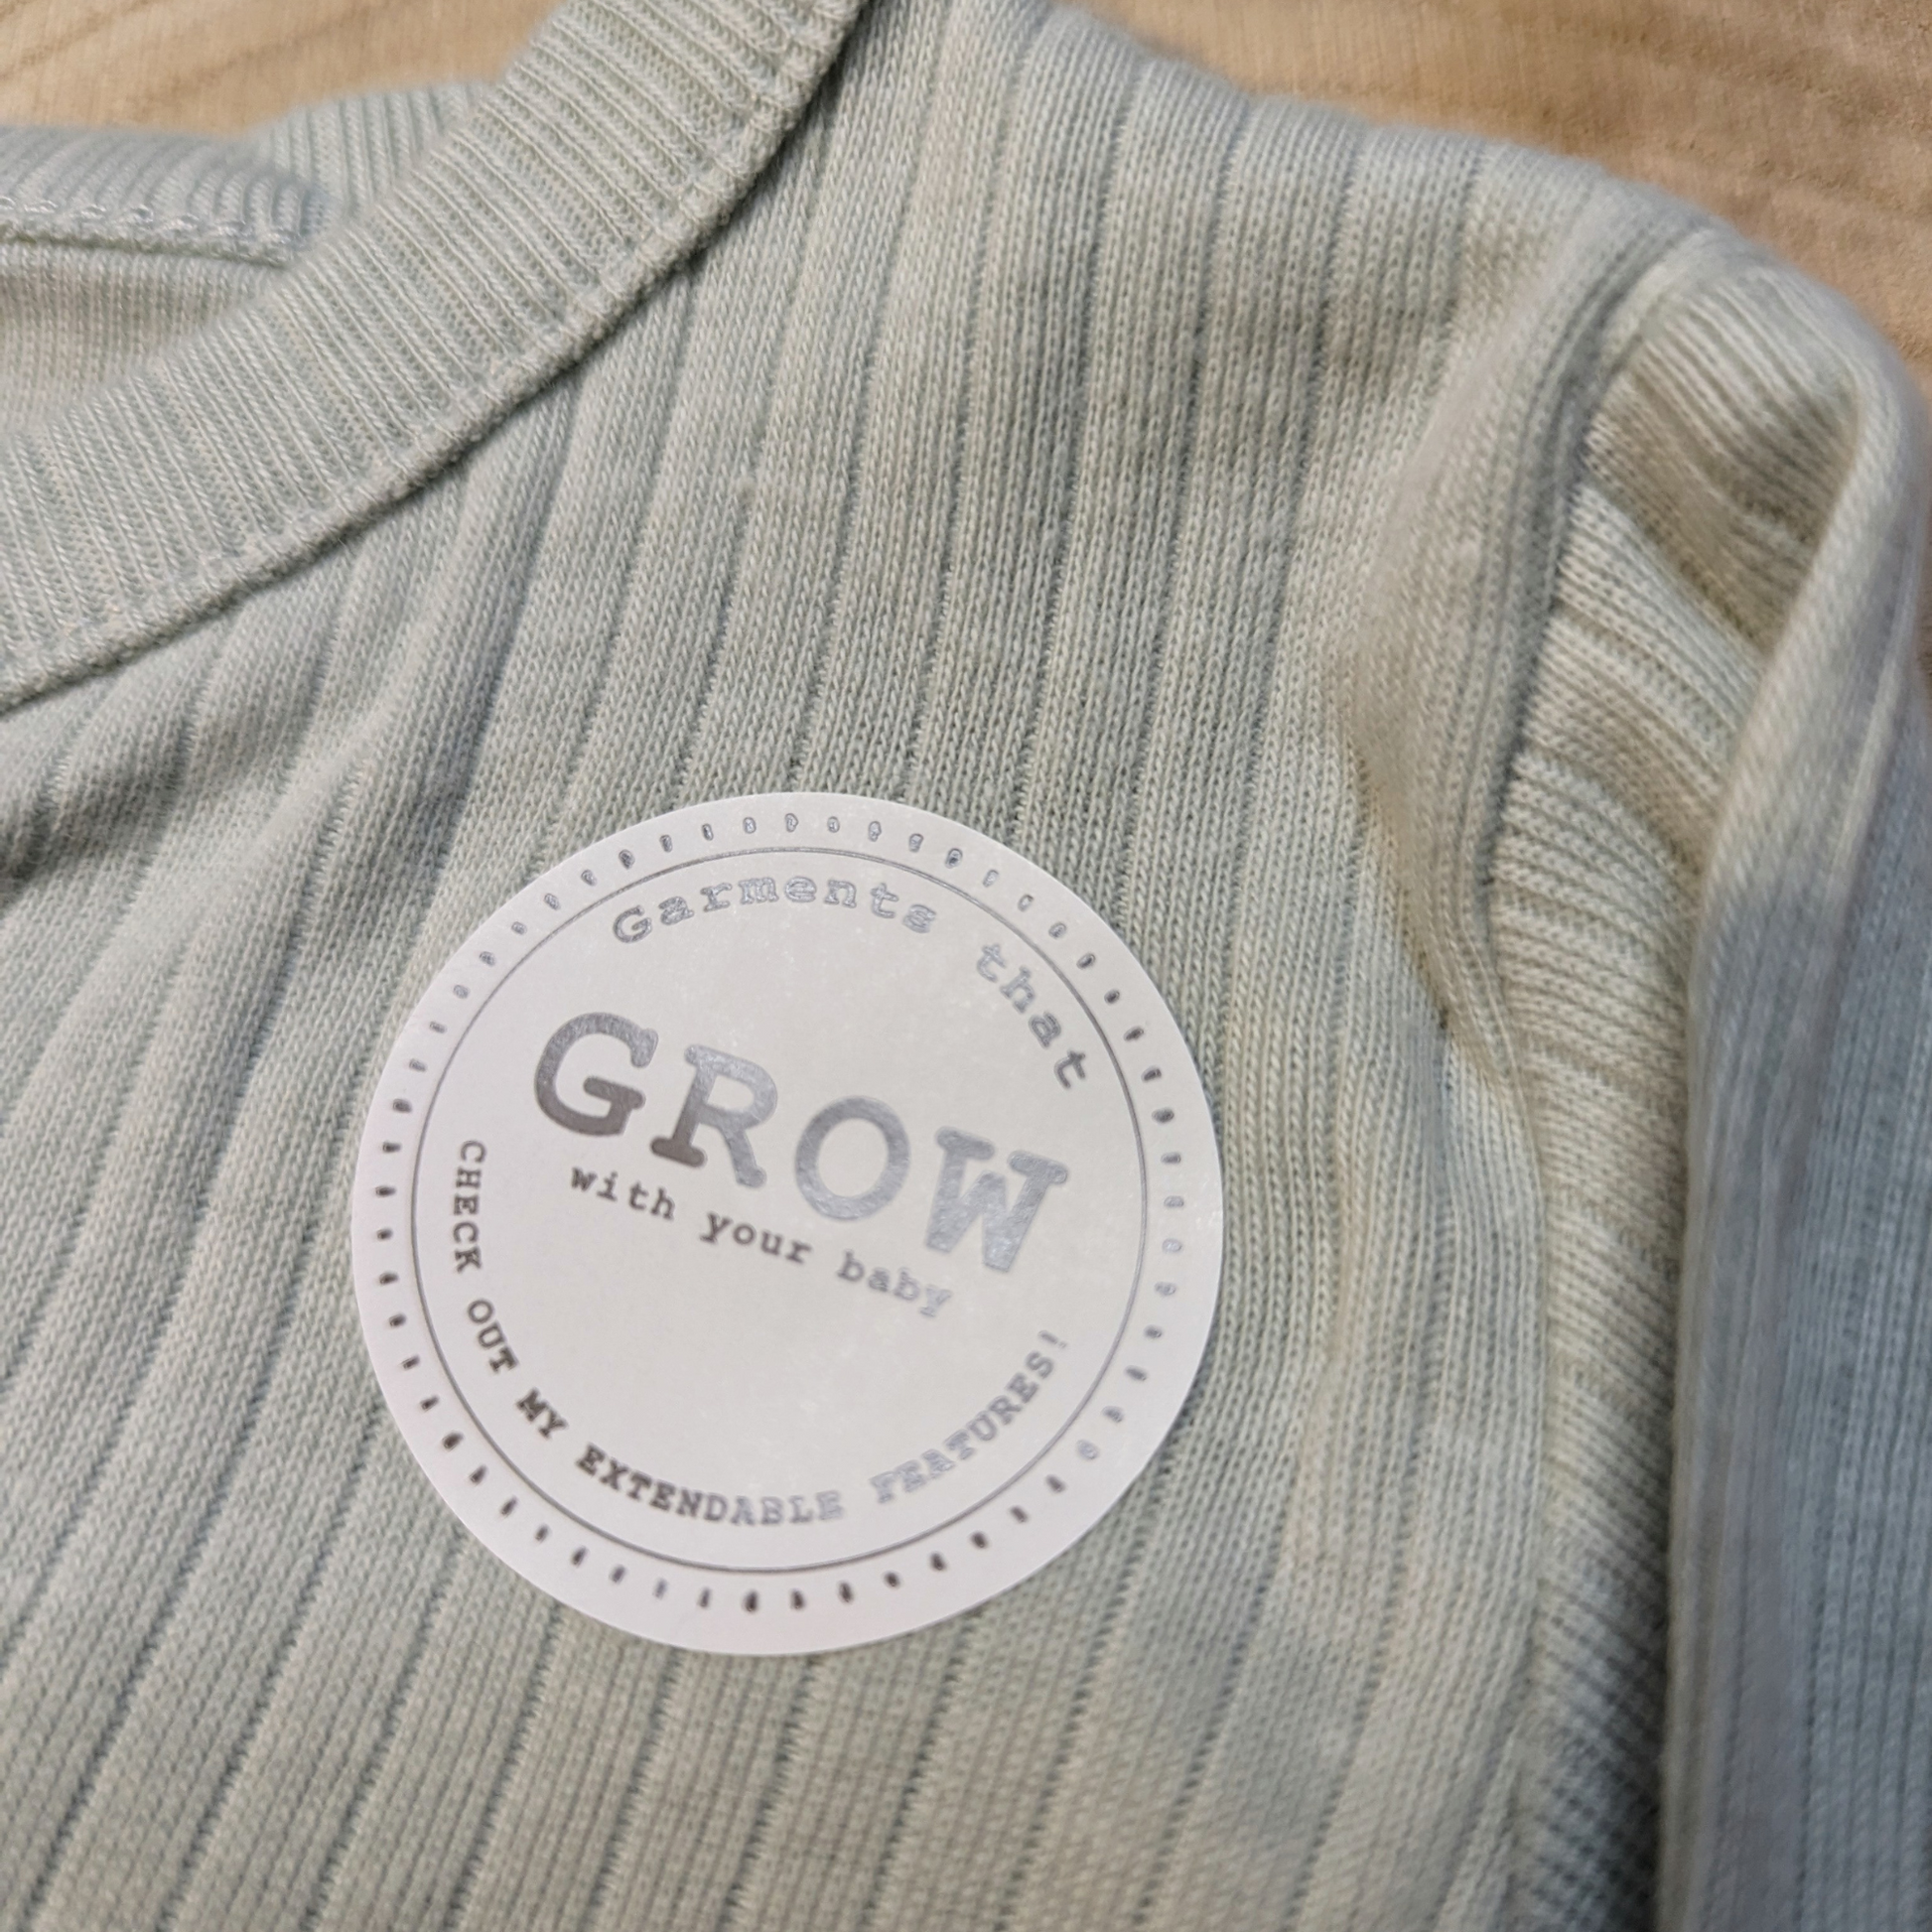 Sage unisex organic cotton baby clothes set with bodysuit, trousers, and bear hat. Designed for comfort, growth, and sustainability by Homegrown Baby.